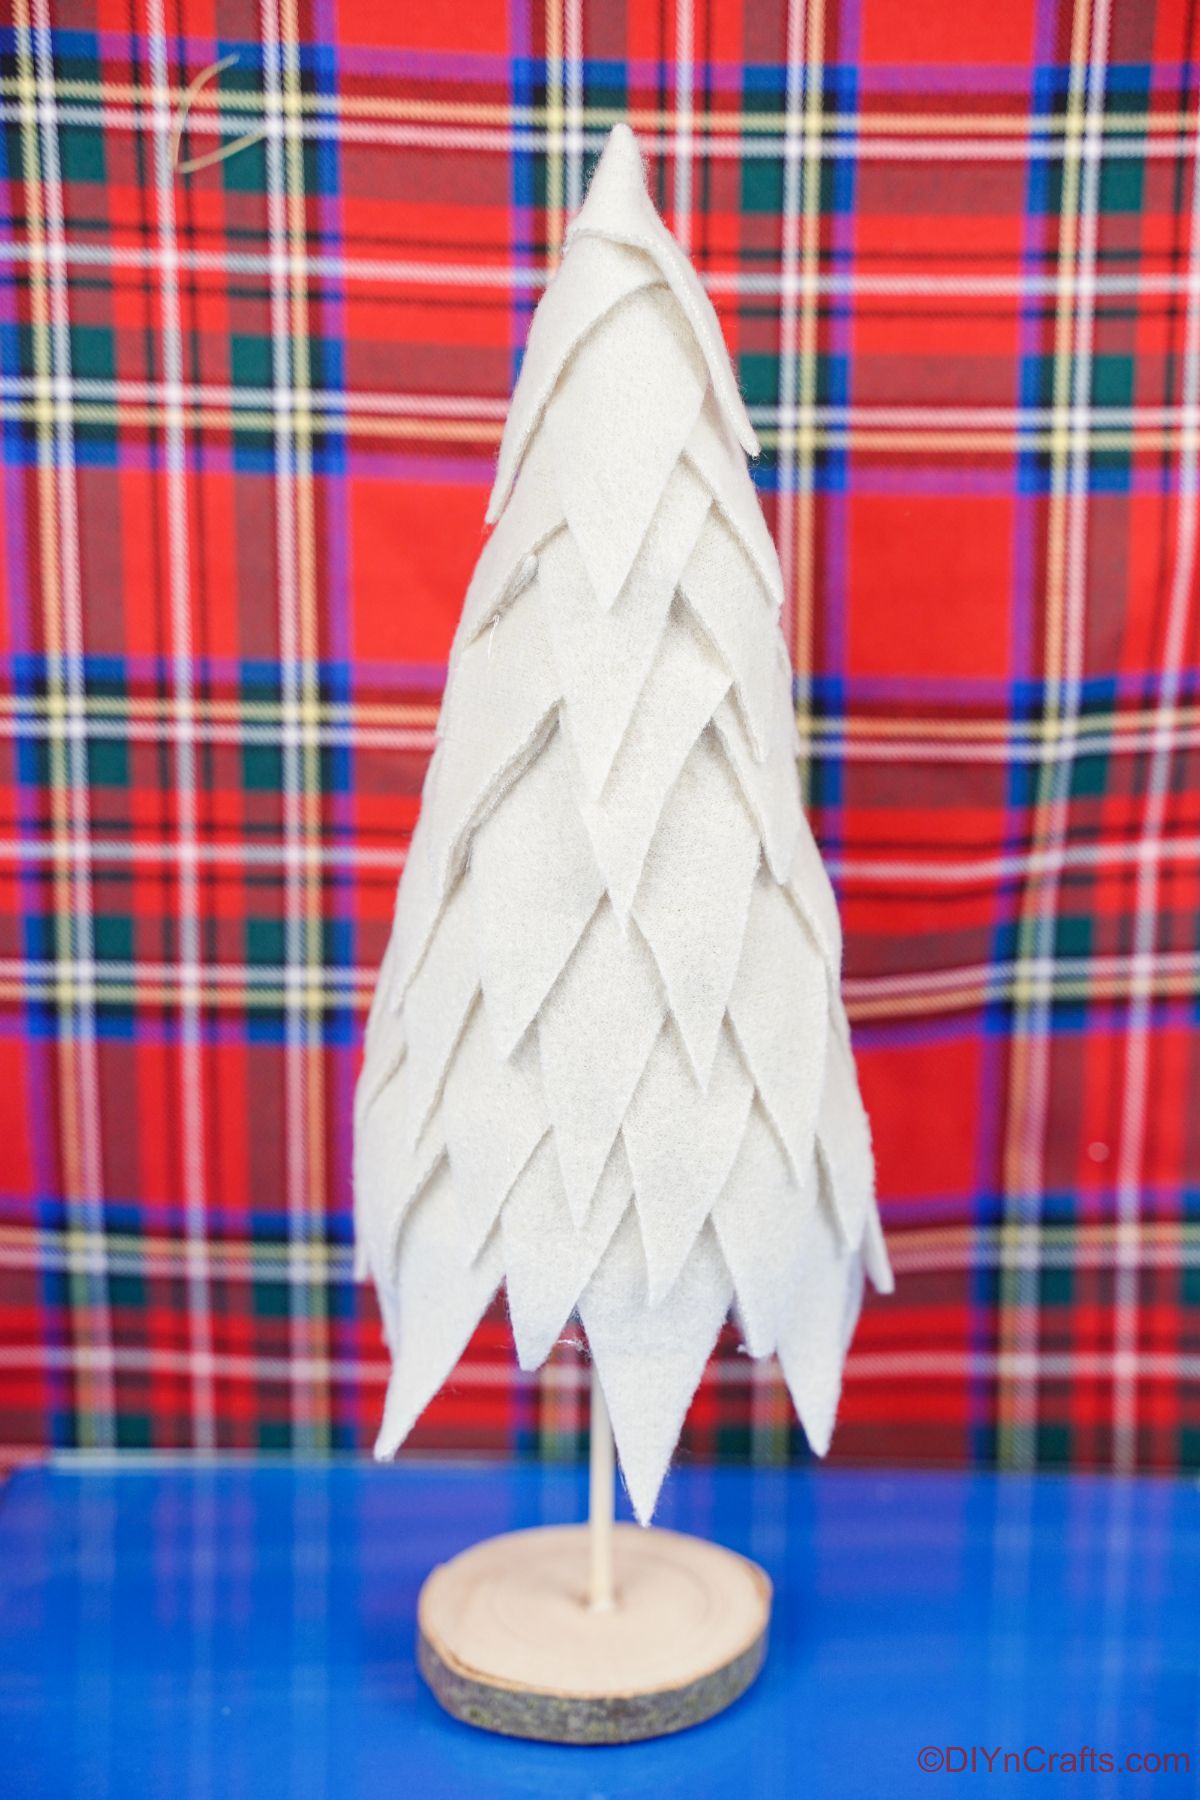 cream fabric tree on blue table by plaid background